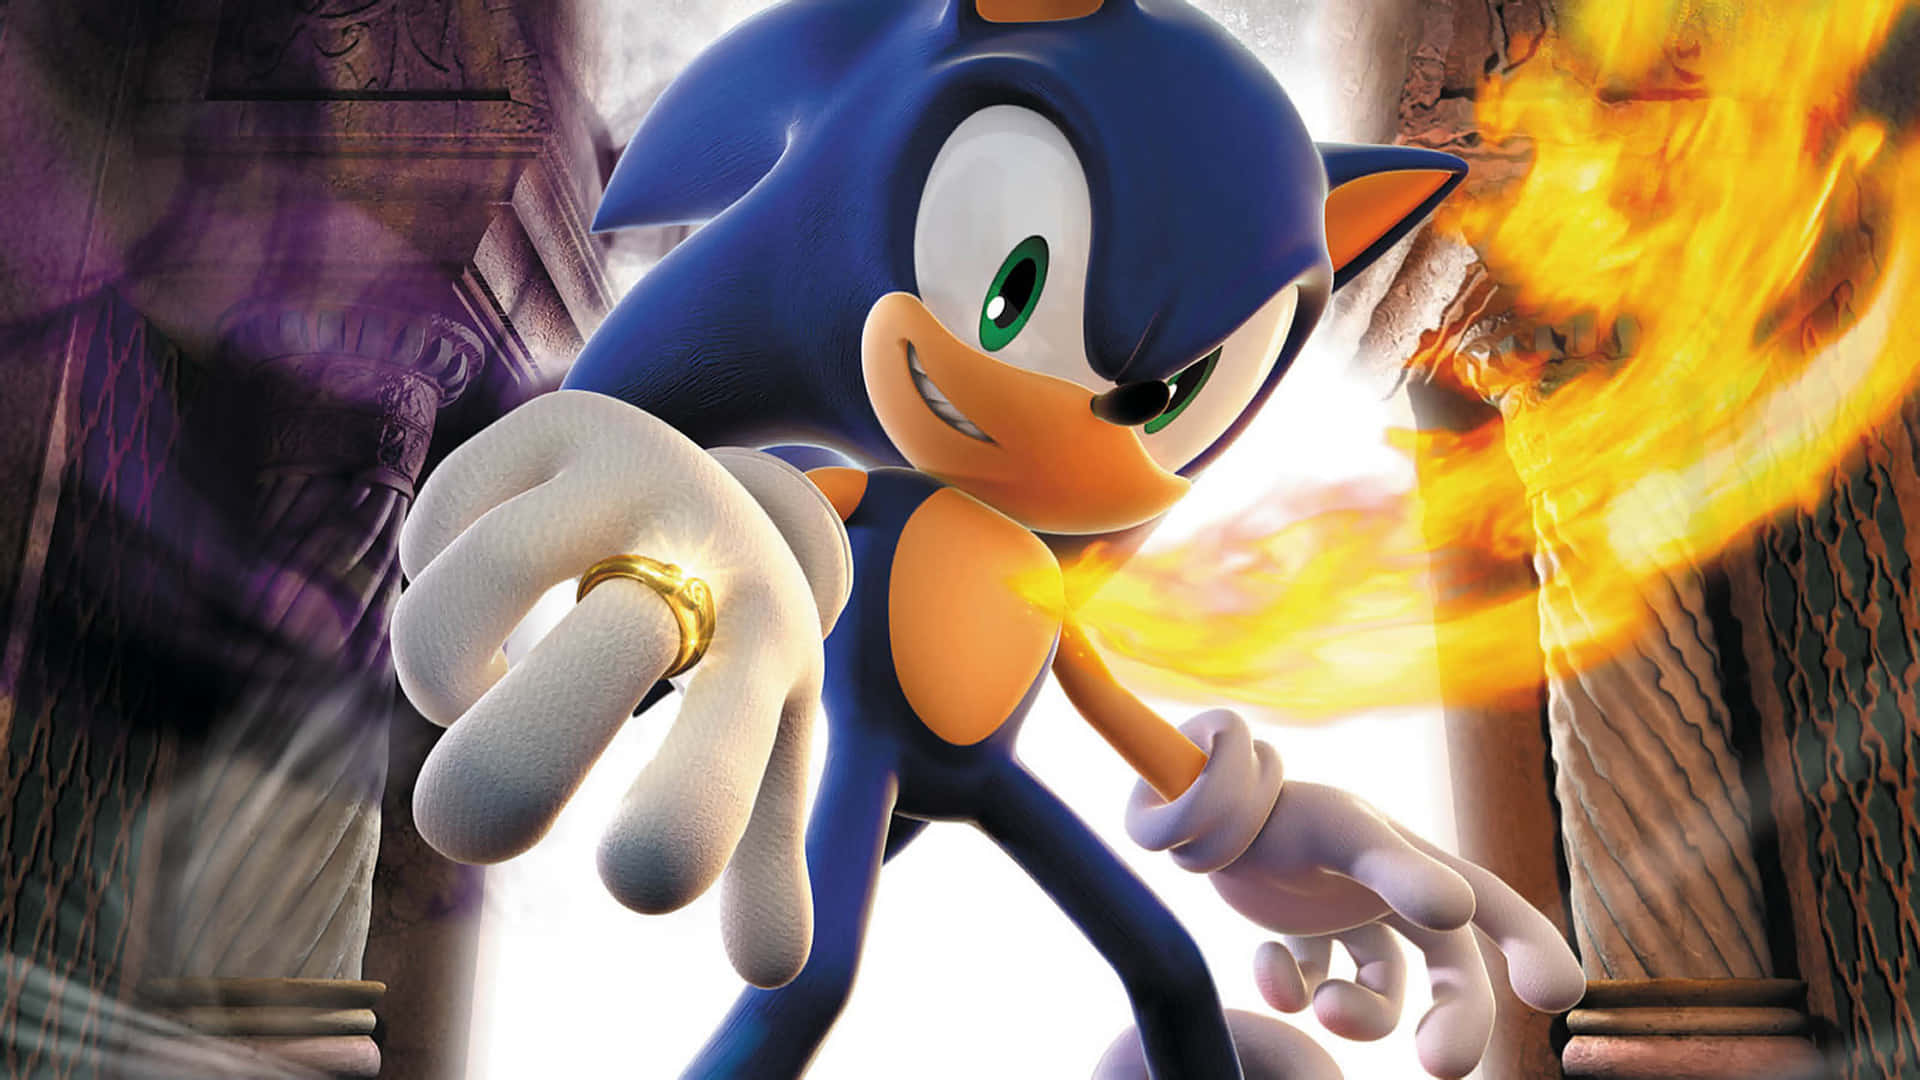 Sonic speeds through a magical world in Sonic and the Secret Rings Wallpaper